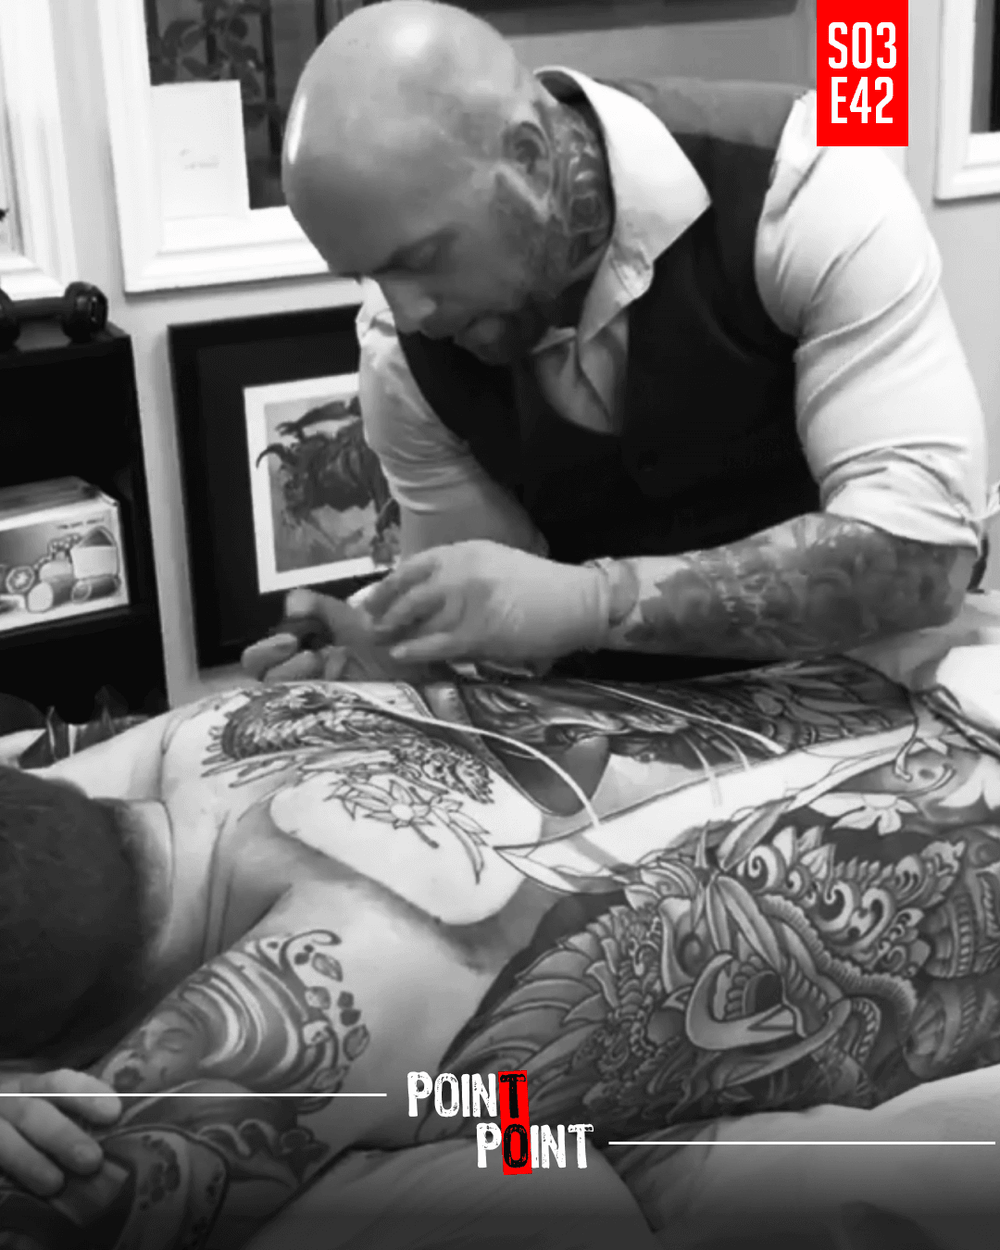 Damian Robertson Talks Life-Changing Experiences, PTSD And How Tattooing Brought Him Focus...